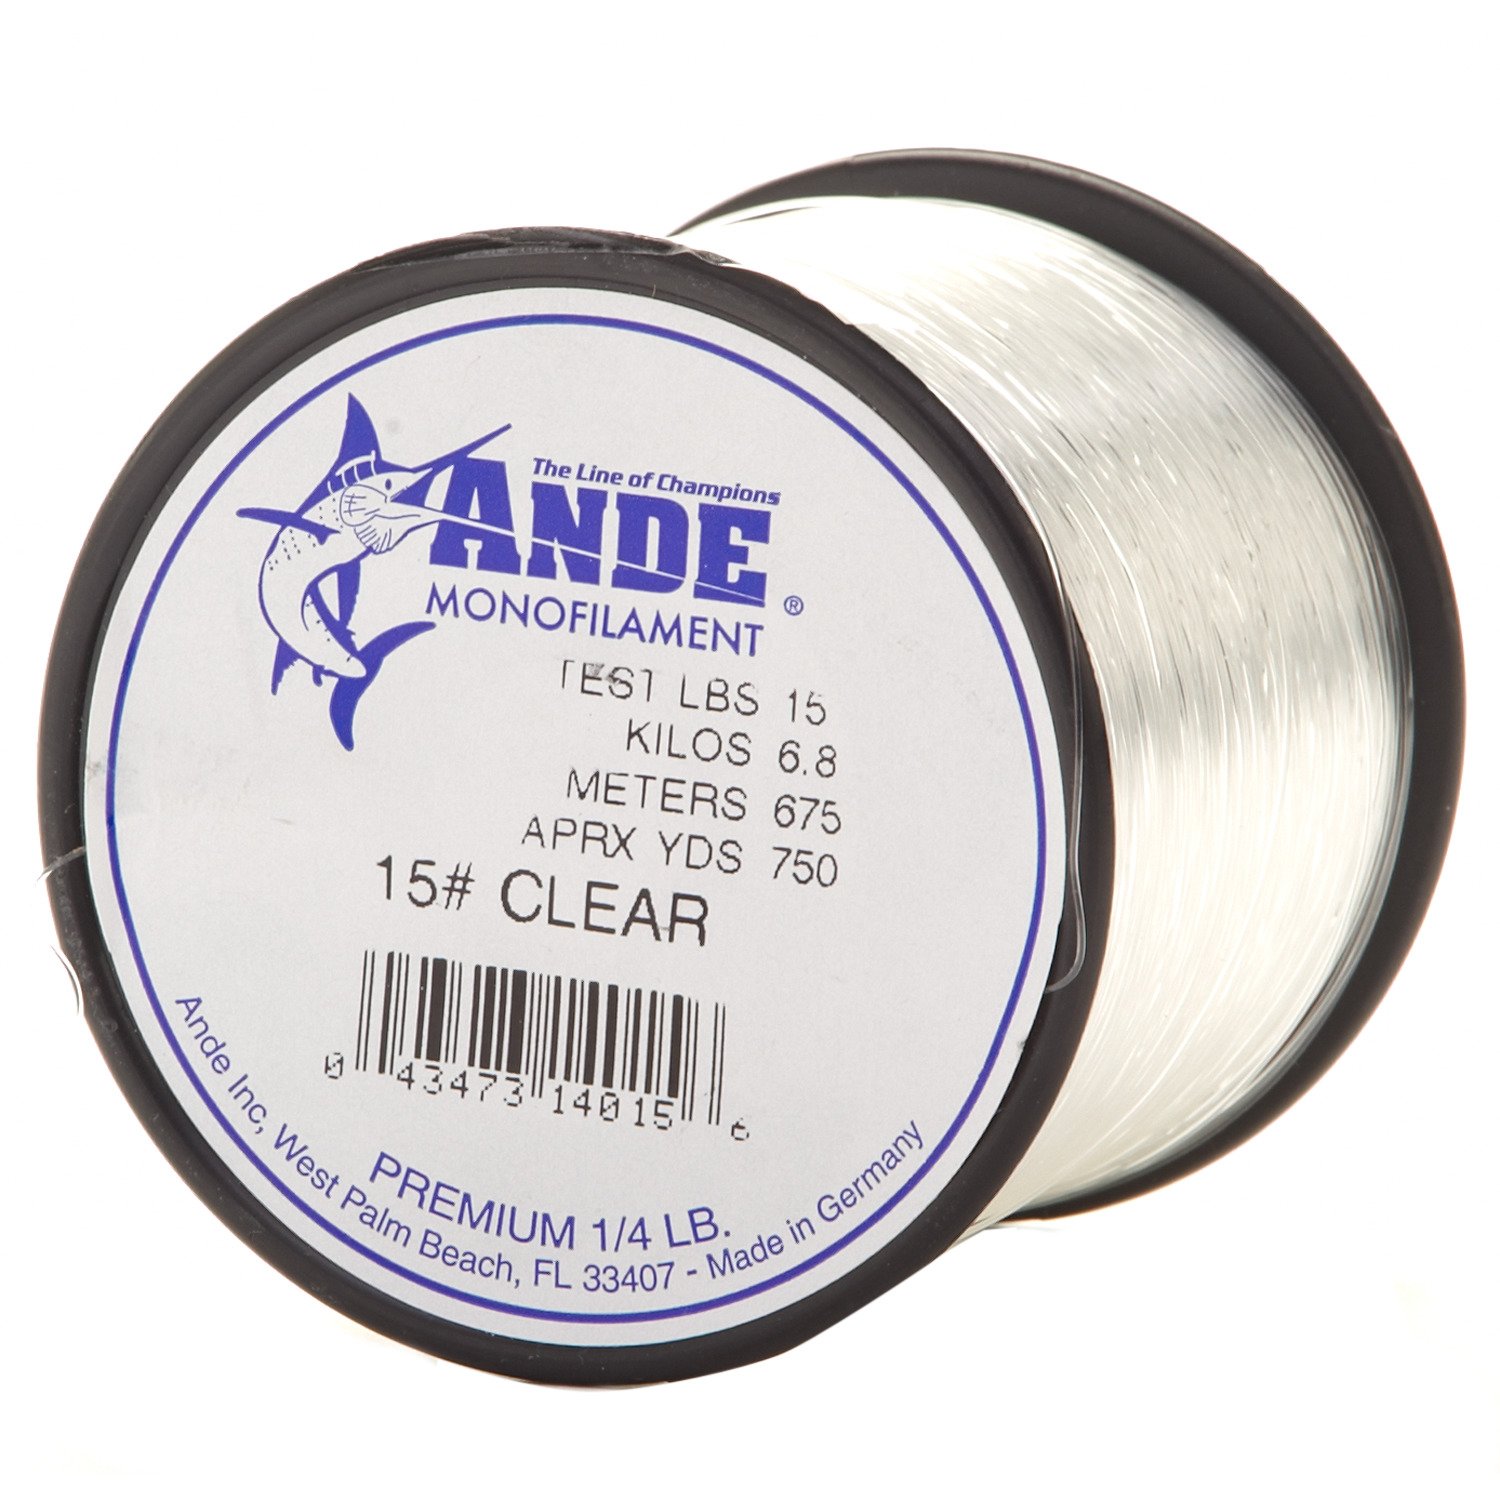 Ande Monofilament Line, Fishing Tackle